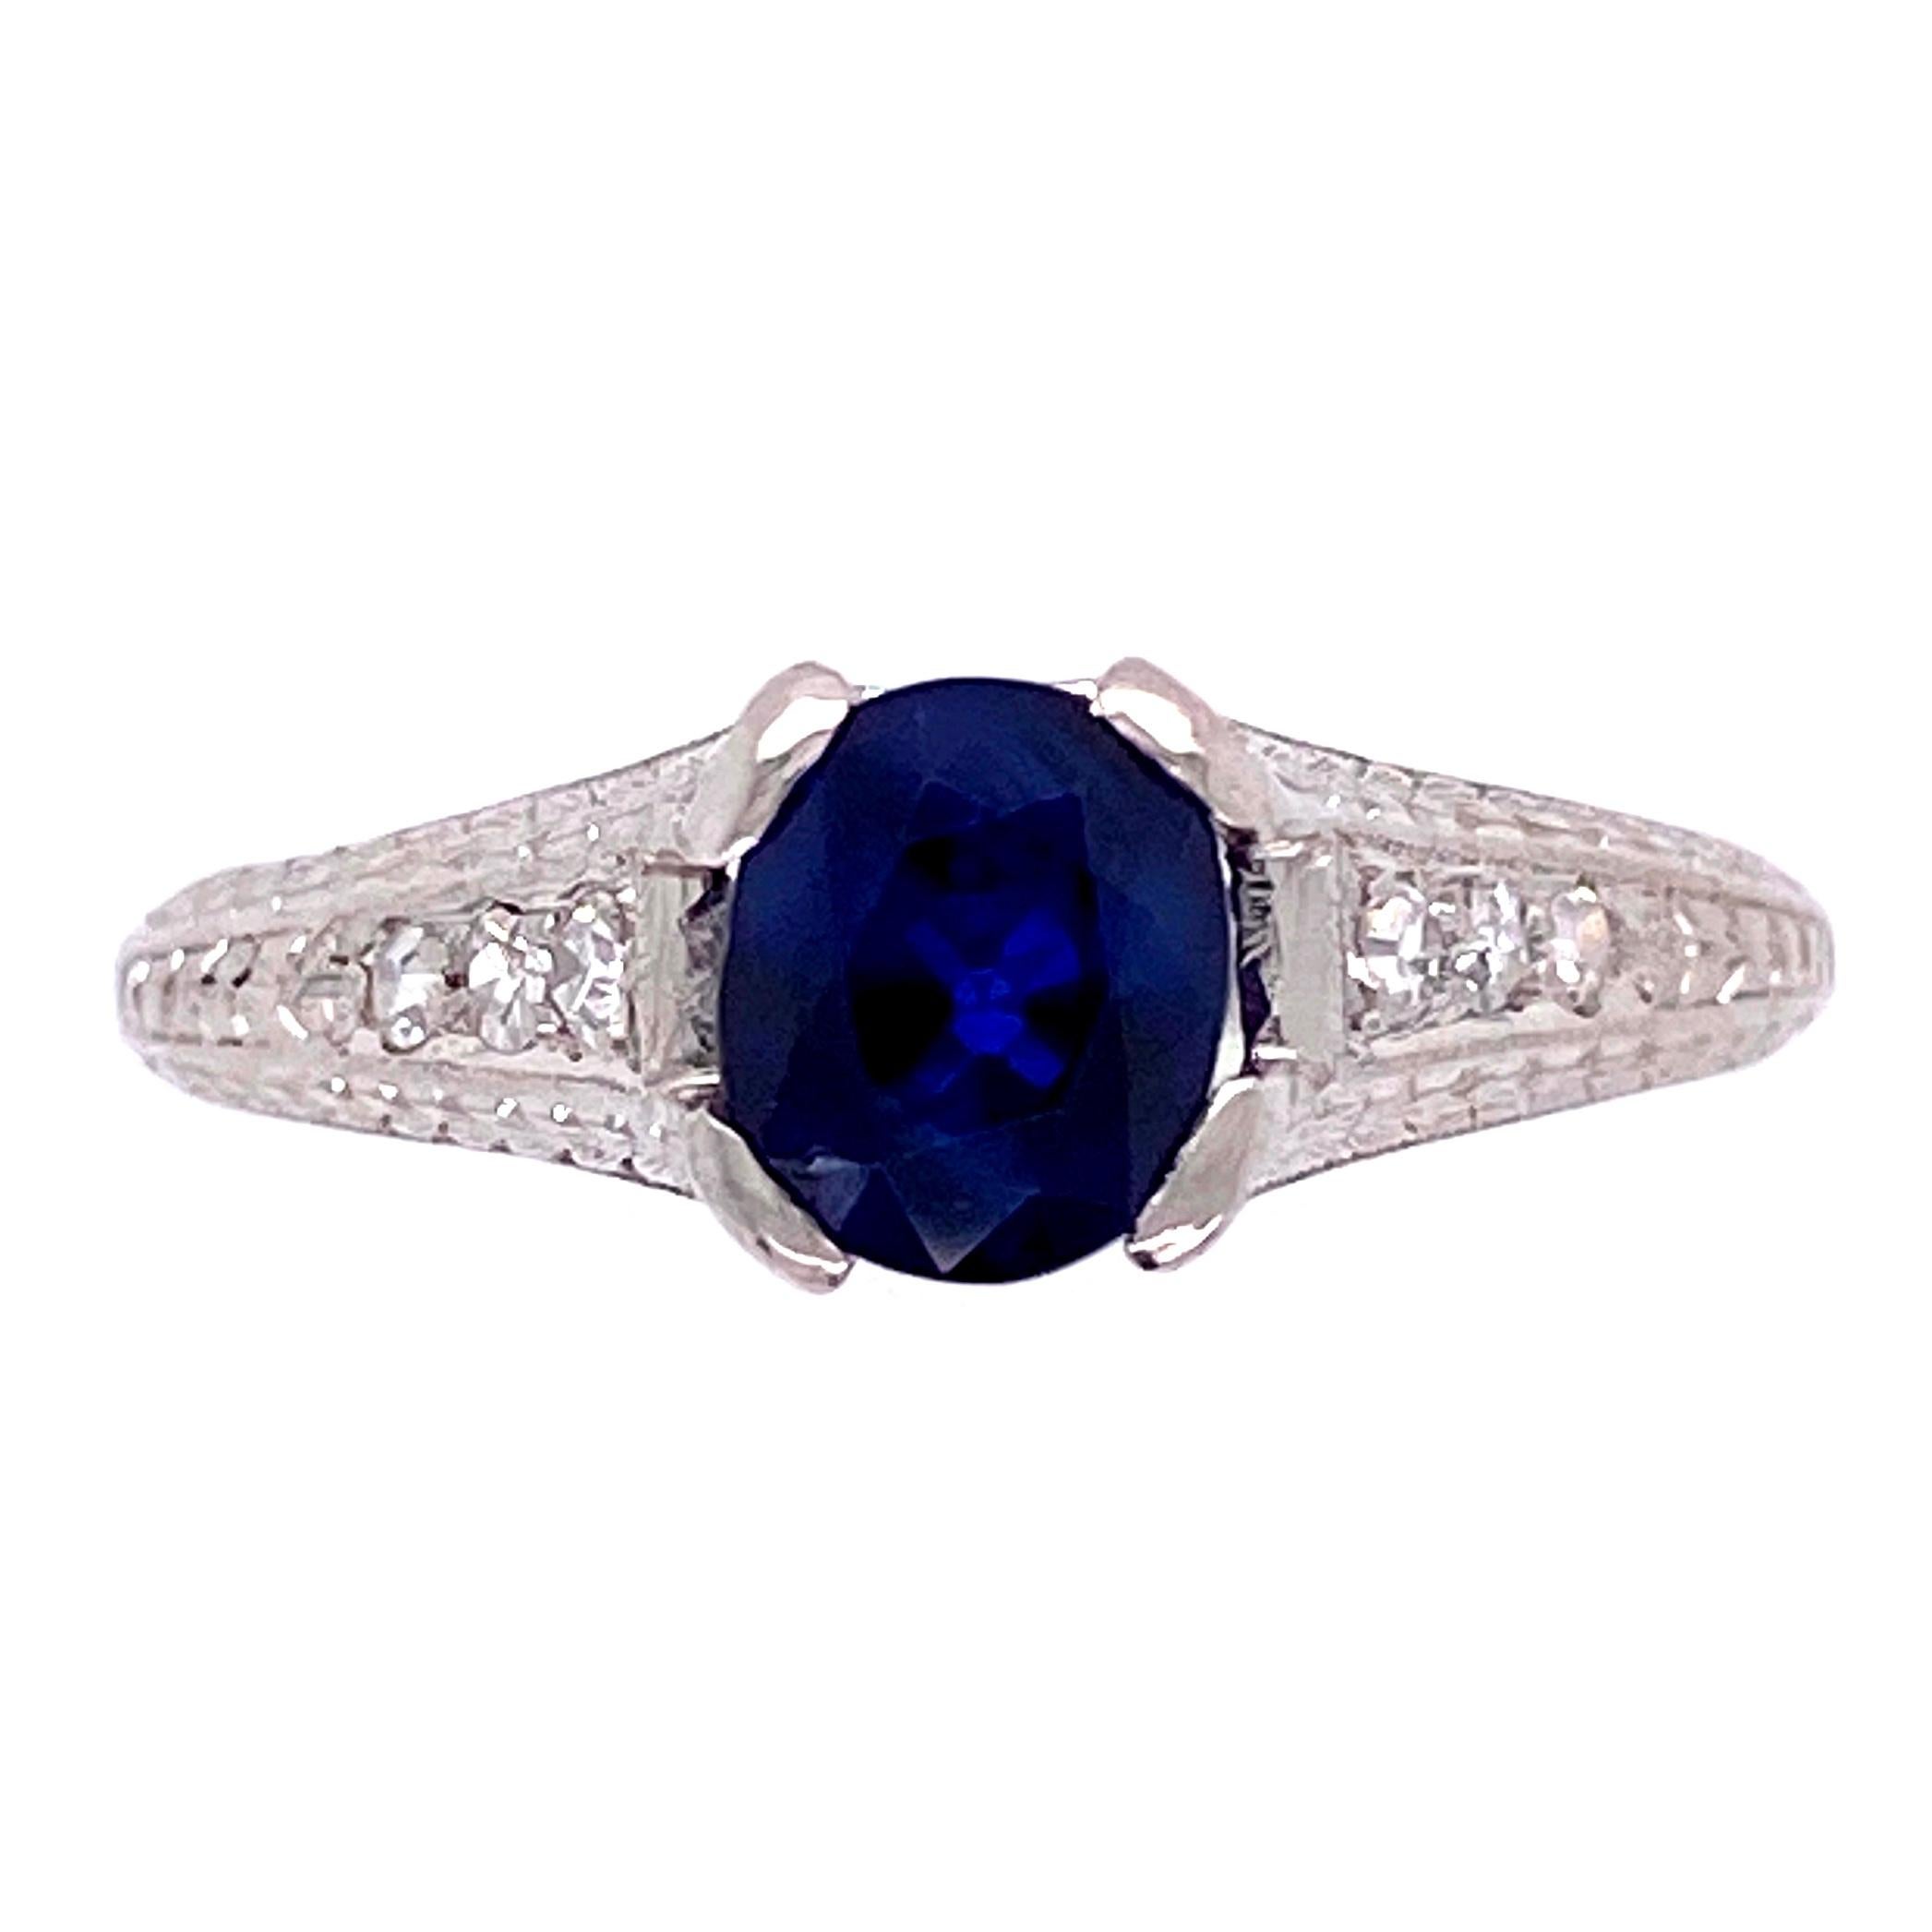 Simply Beautiful! Classic and finely detailed Blue Sapphire Ring, center securely set with a 1.05 Carat Blue Sapphire, accented by Diamonds. Hand crafted Platinum mounting. Engraving and milgrain adorn this Beautiful ring. Ring size 5.25. The